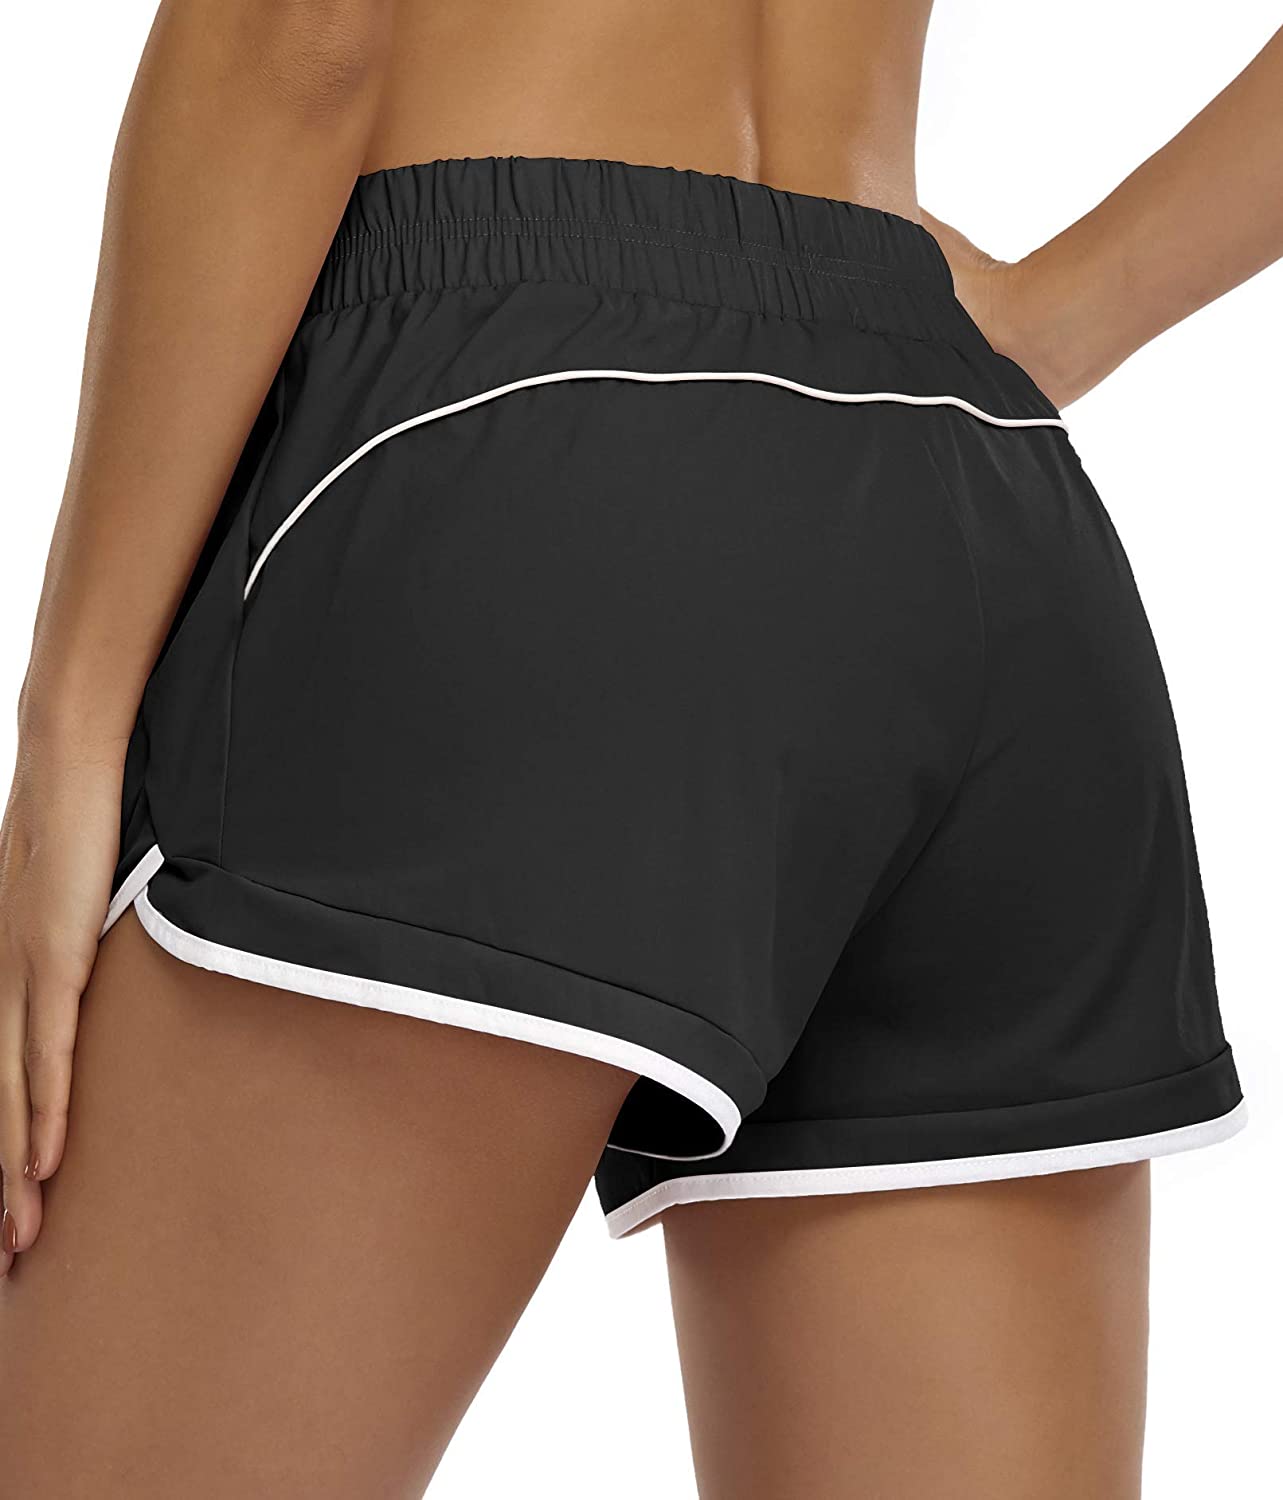 Blevonh Women Elastic Waist Double Layer Casual Running Shorts with Side Pockets